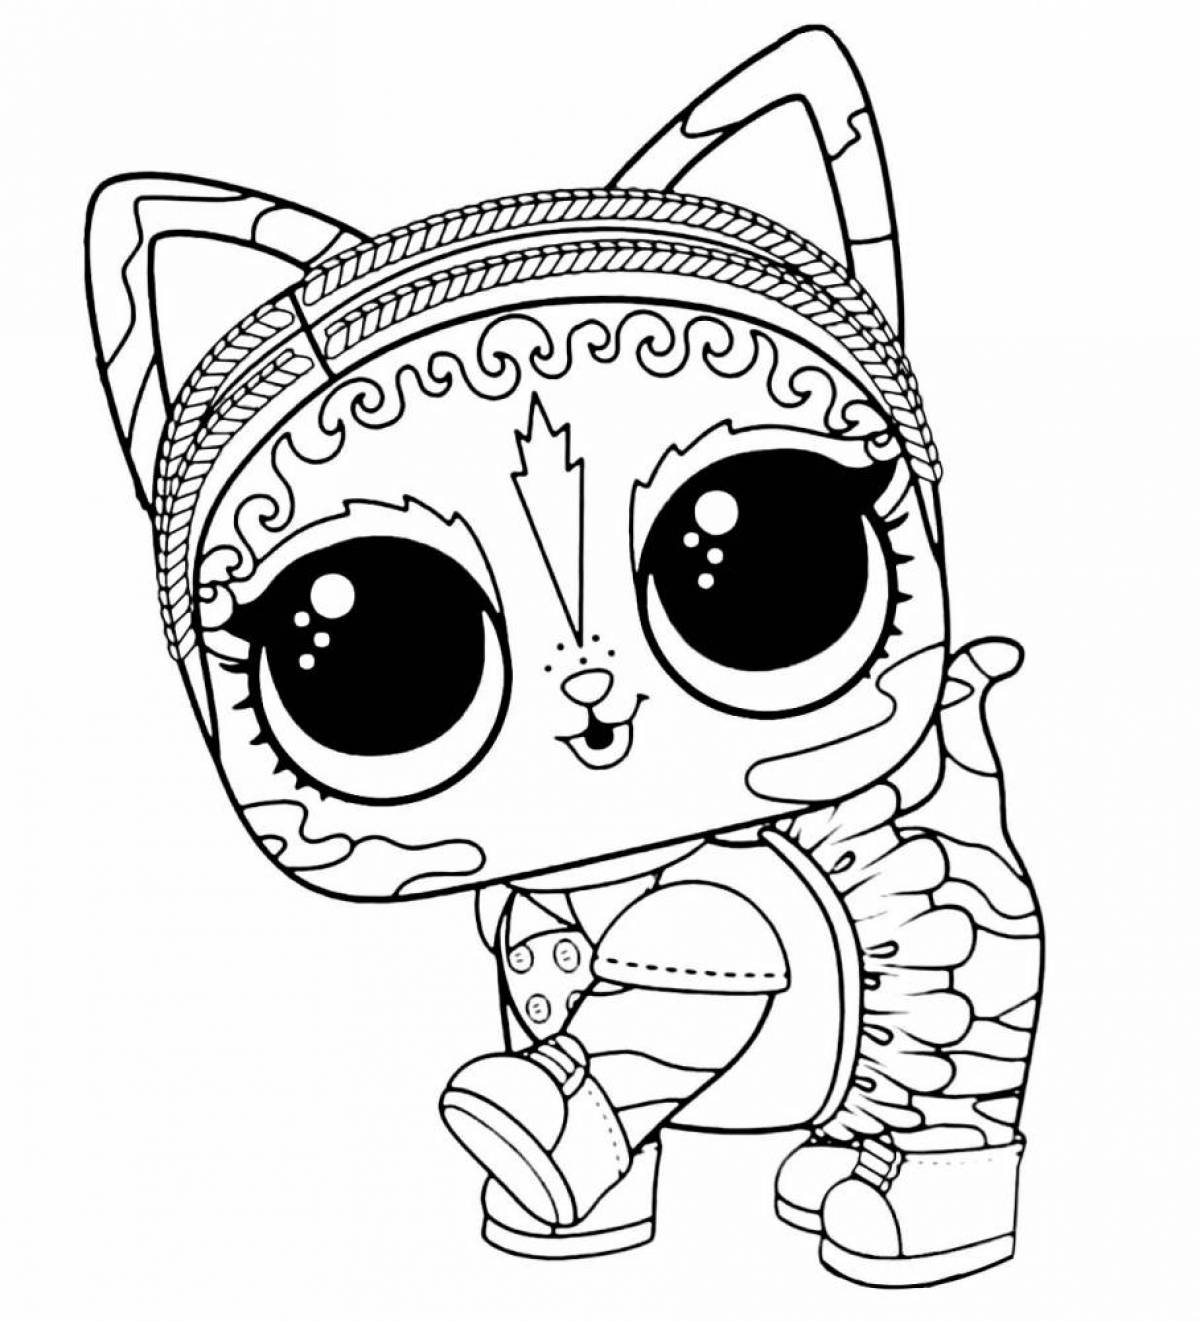 Lol pets coloring page